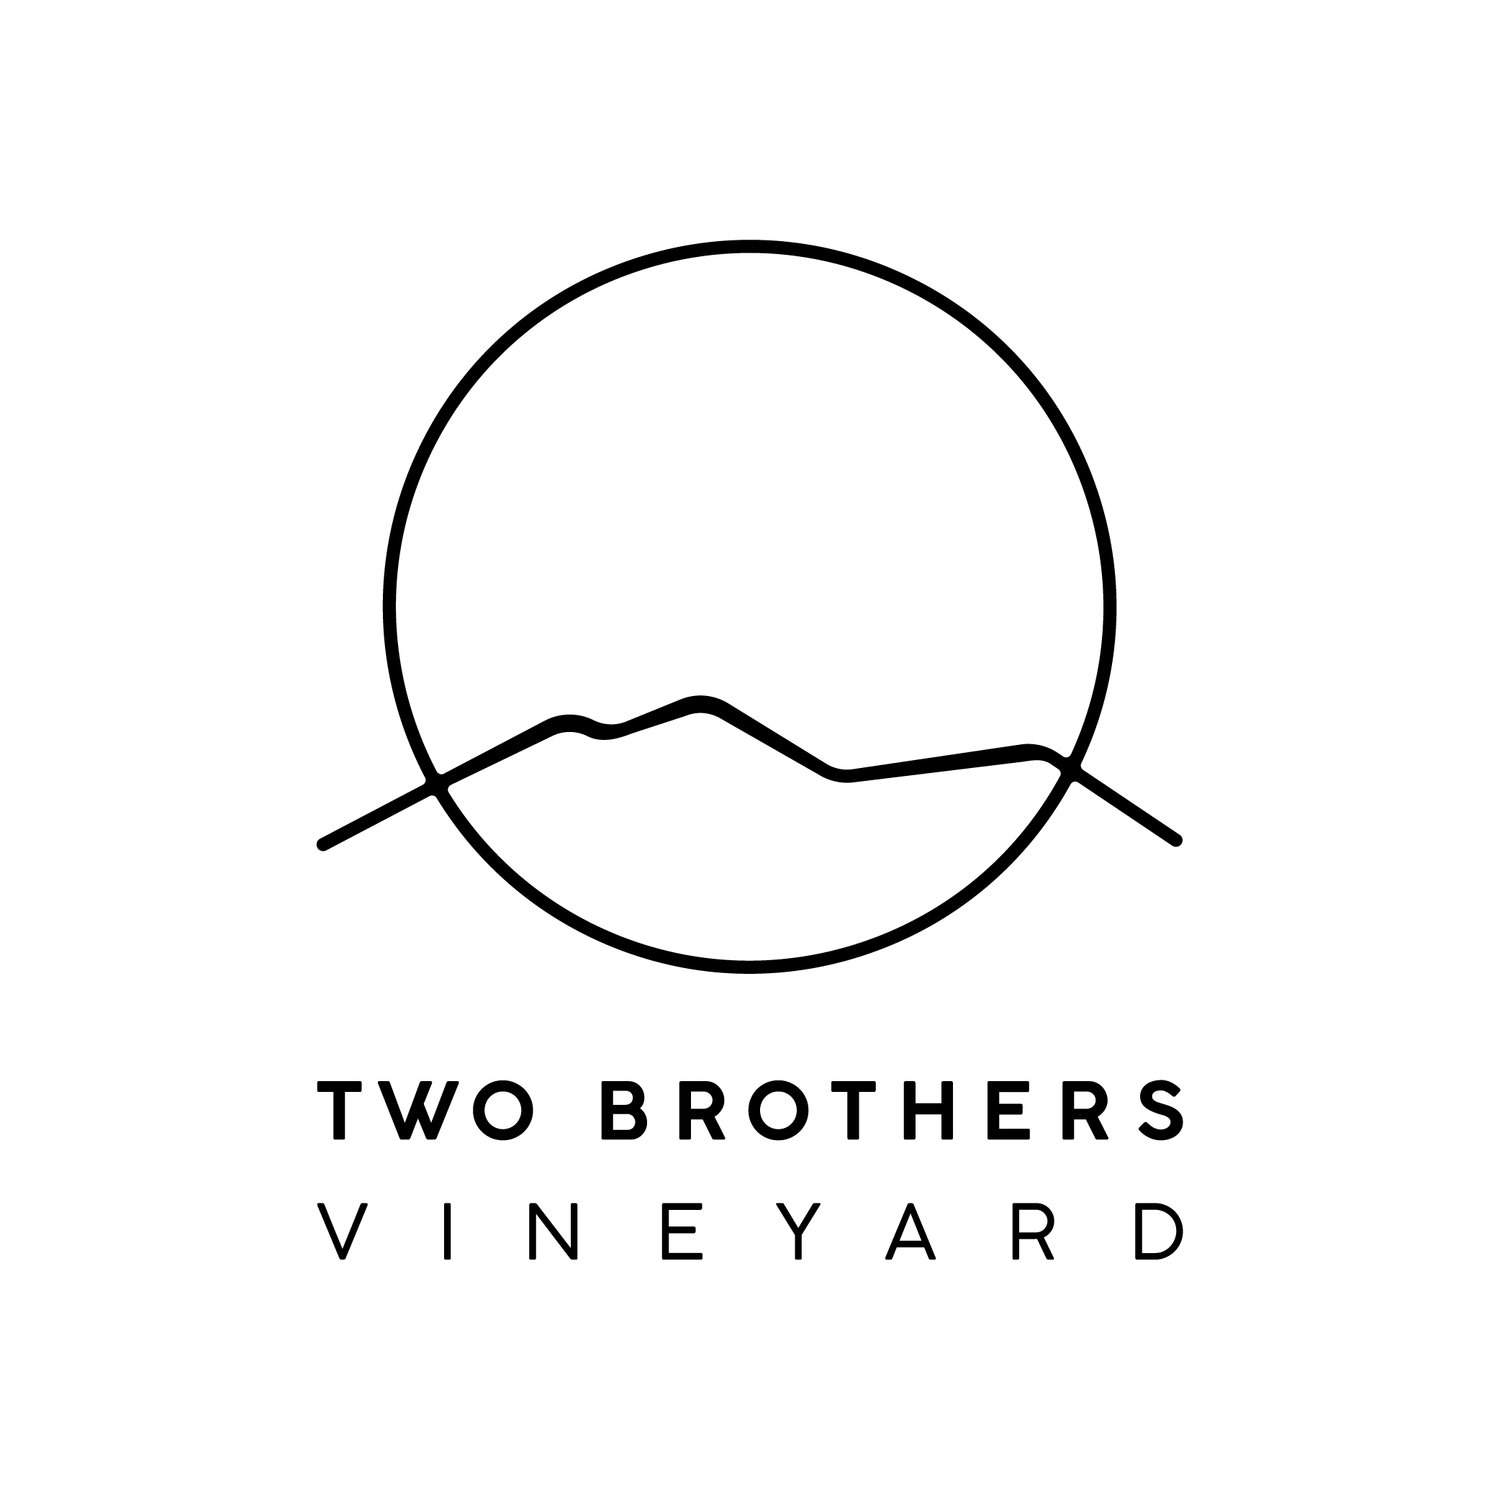 Two Brothers Vineyard